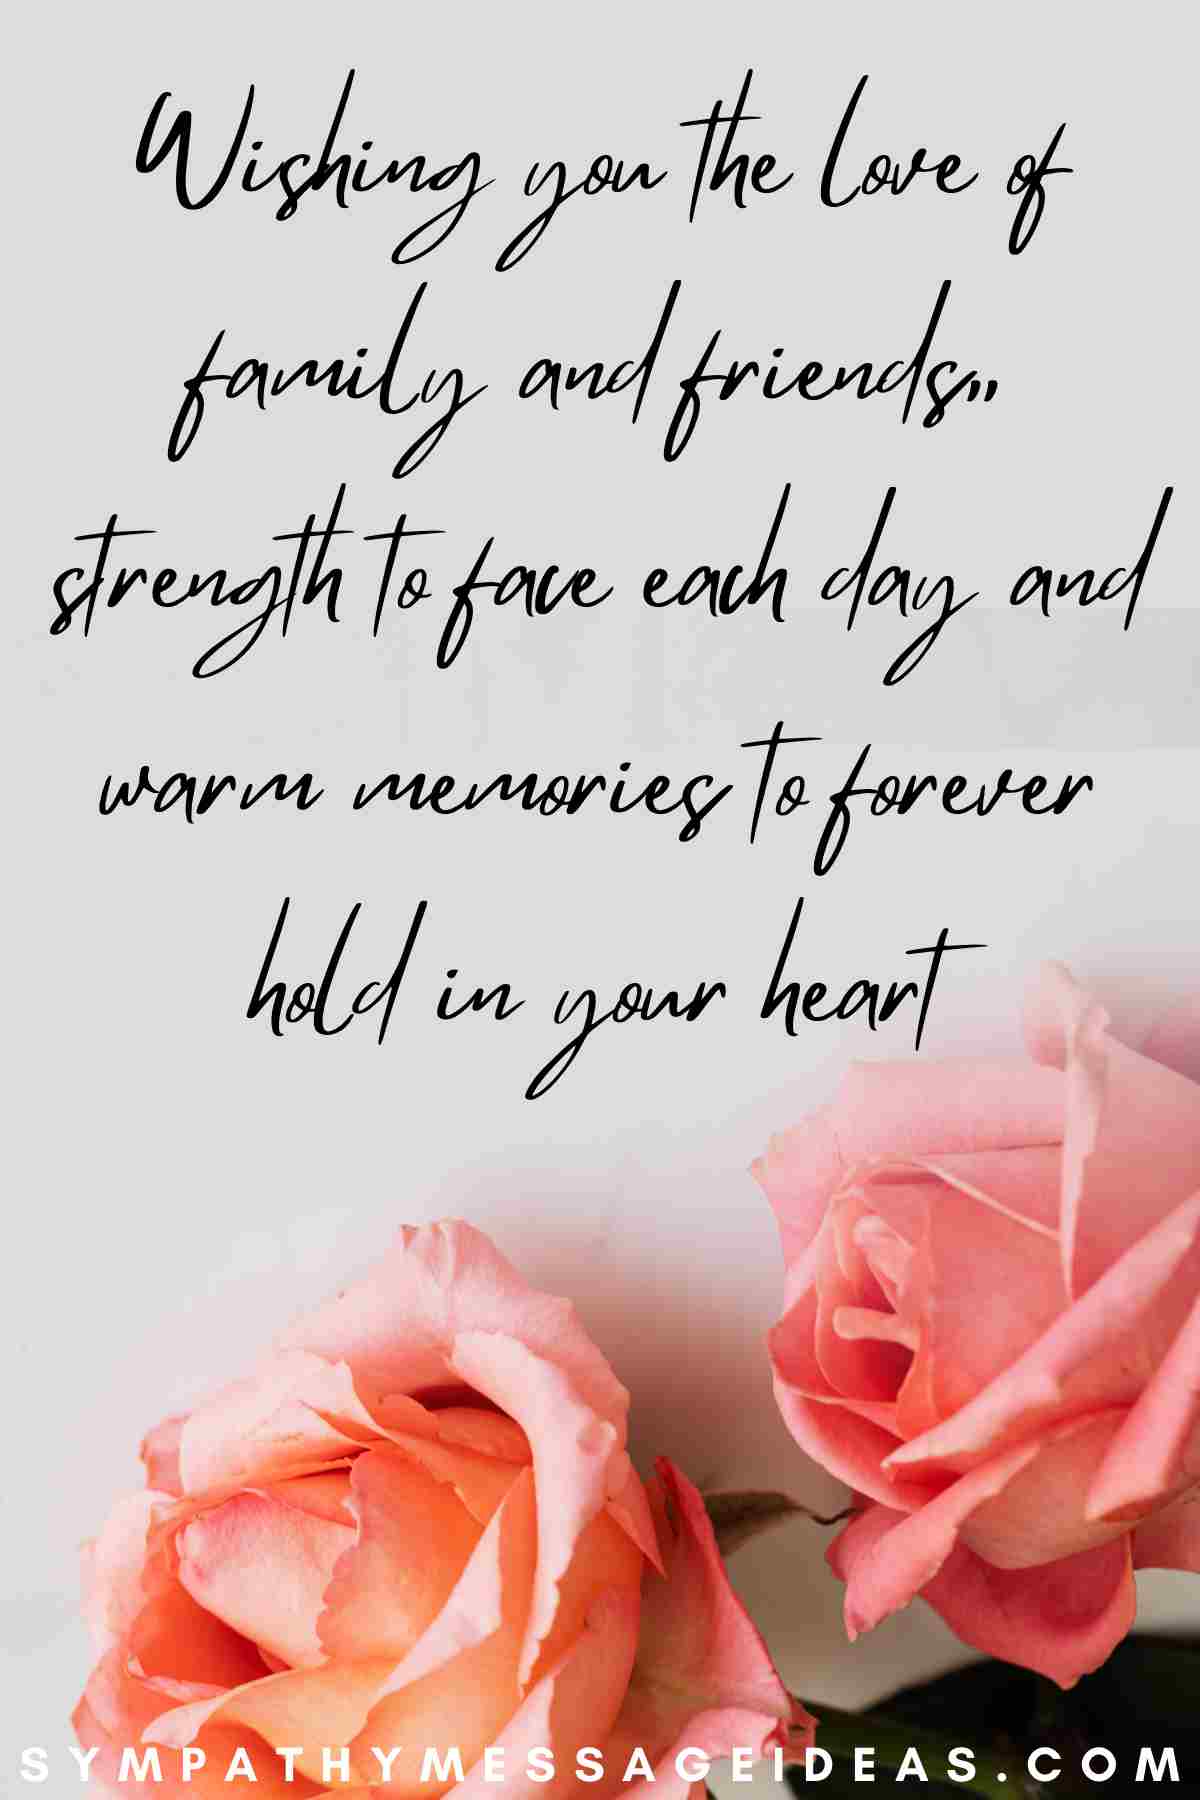 strength and memories condolence message